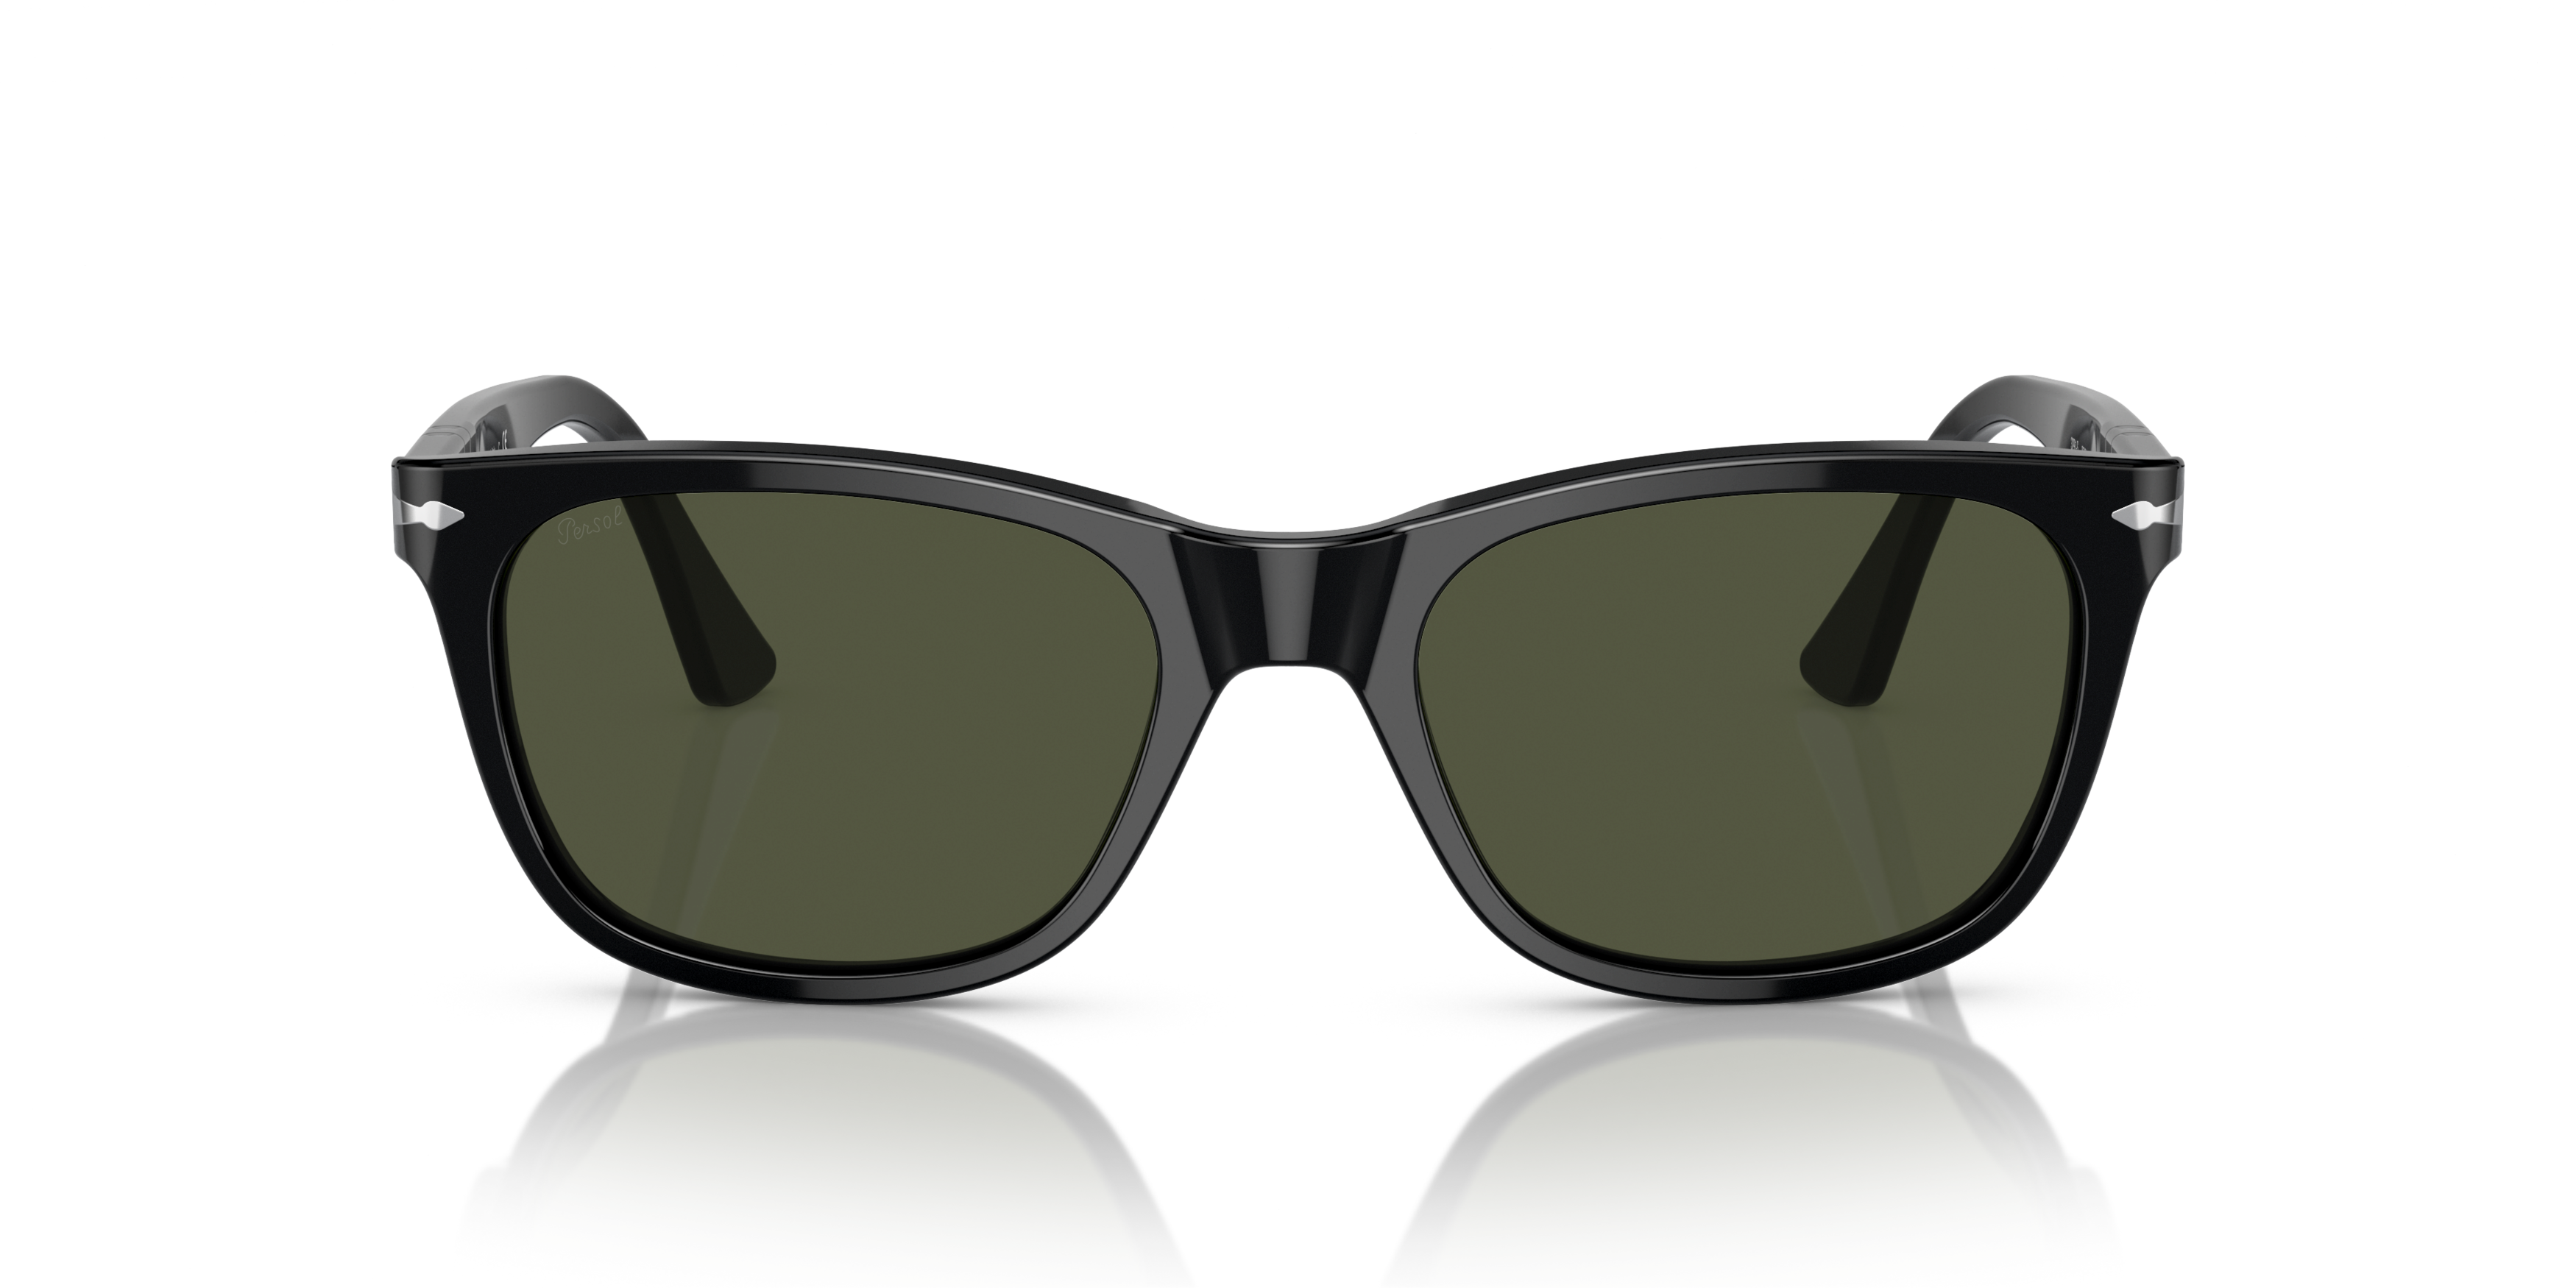 [products.image.front] Persol 0PO3291S 95/31